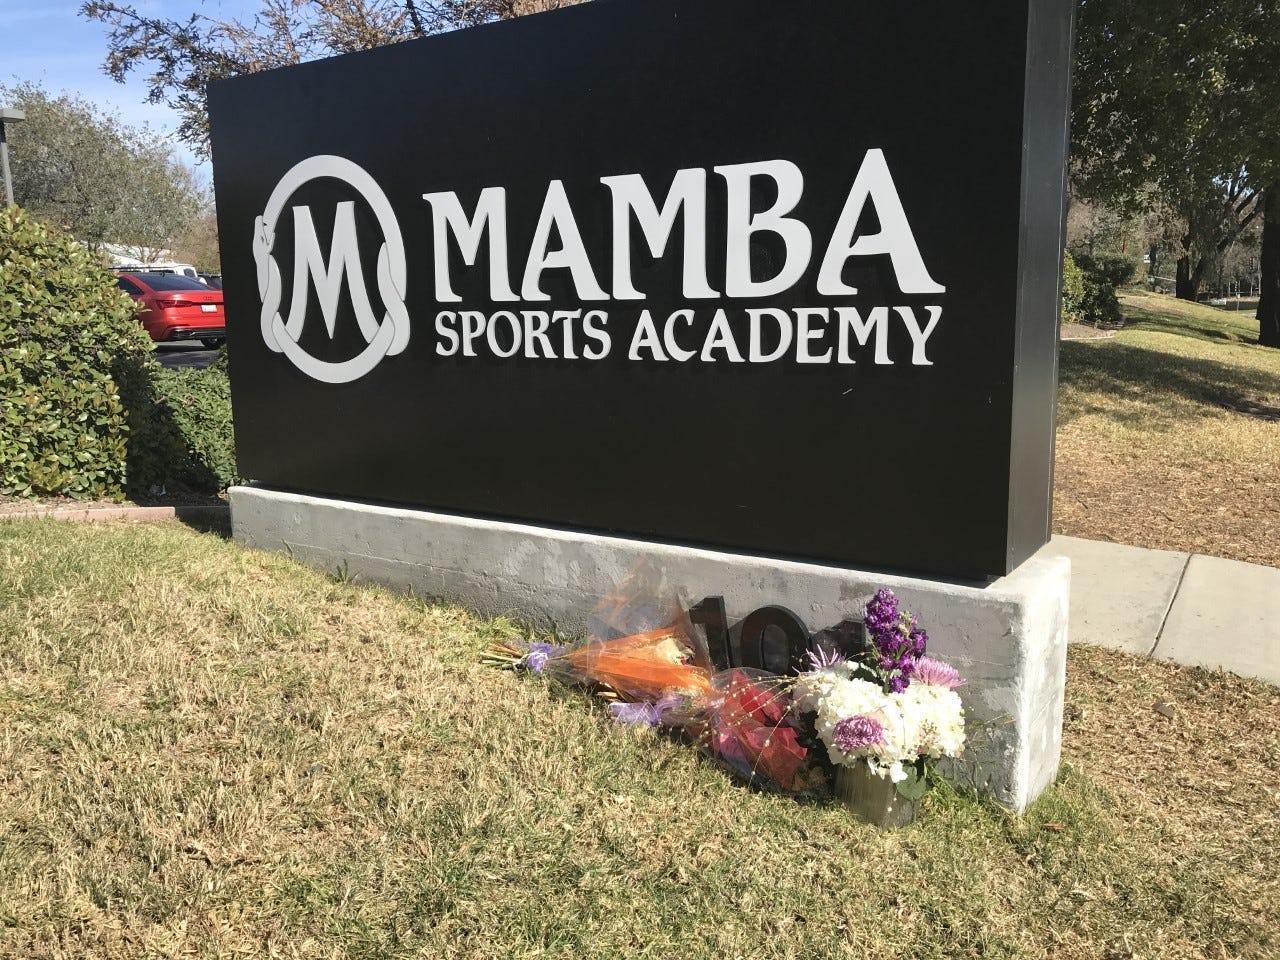 Flowers sit at the base of a Sports Academy sign.